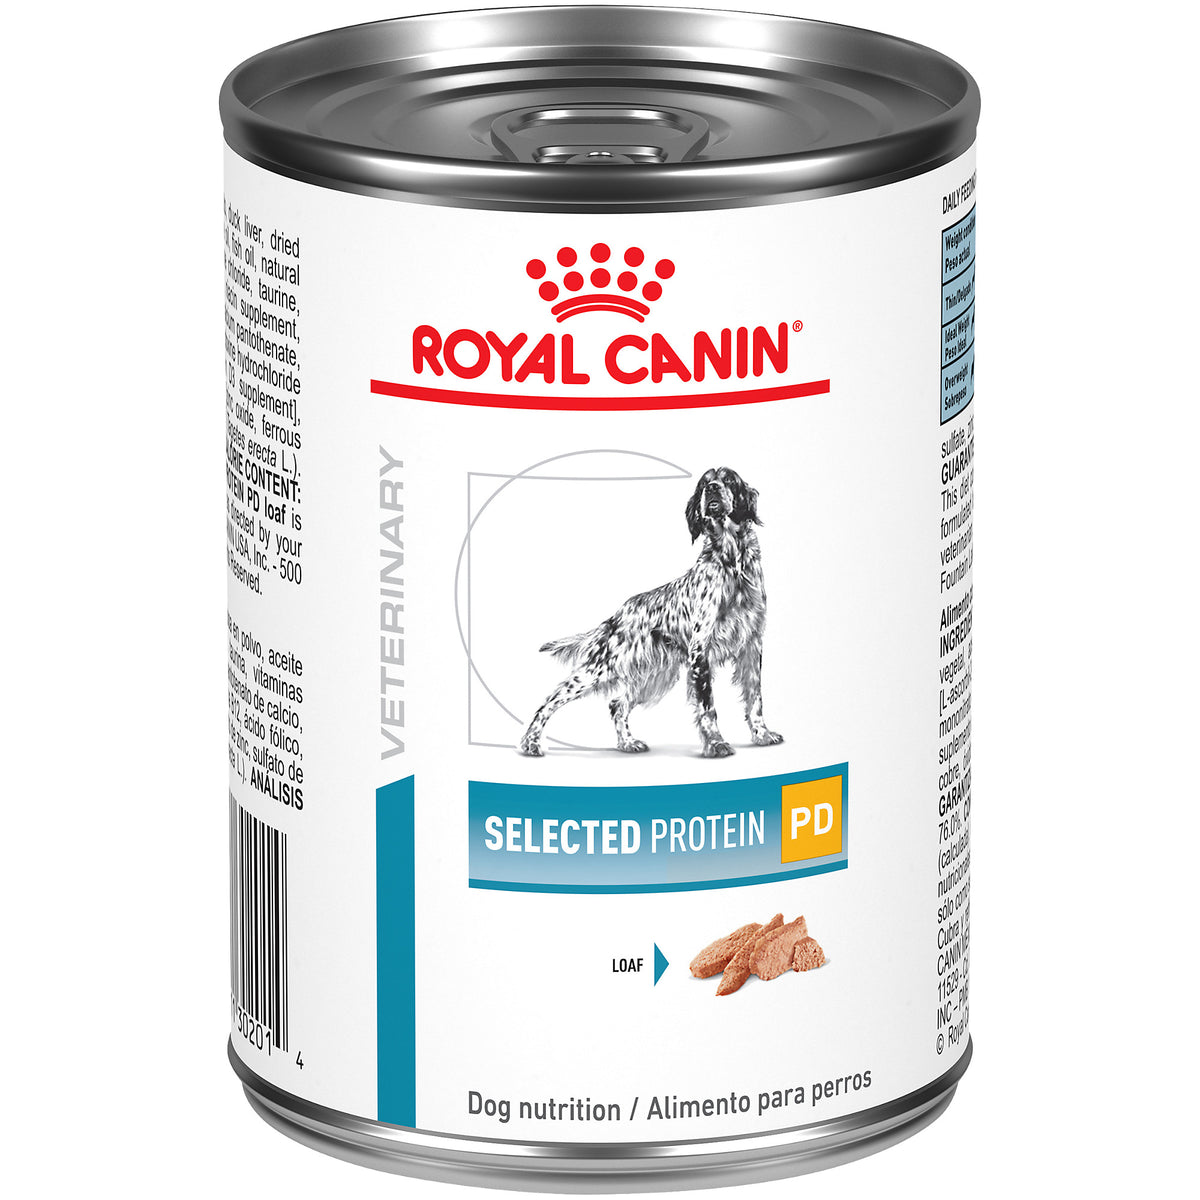 Royal Canin Selected Protein PD Dog Can 13.5oz